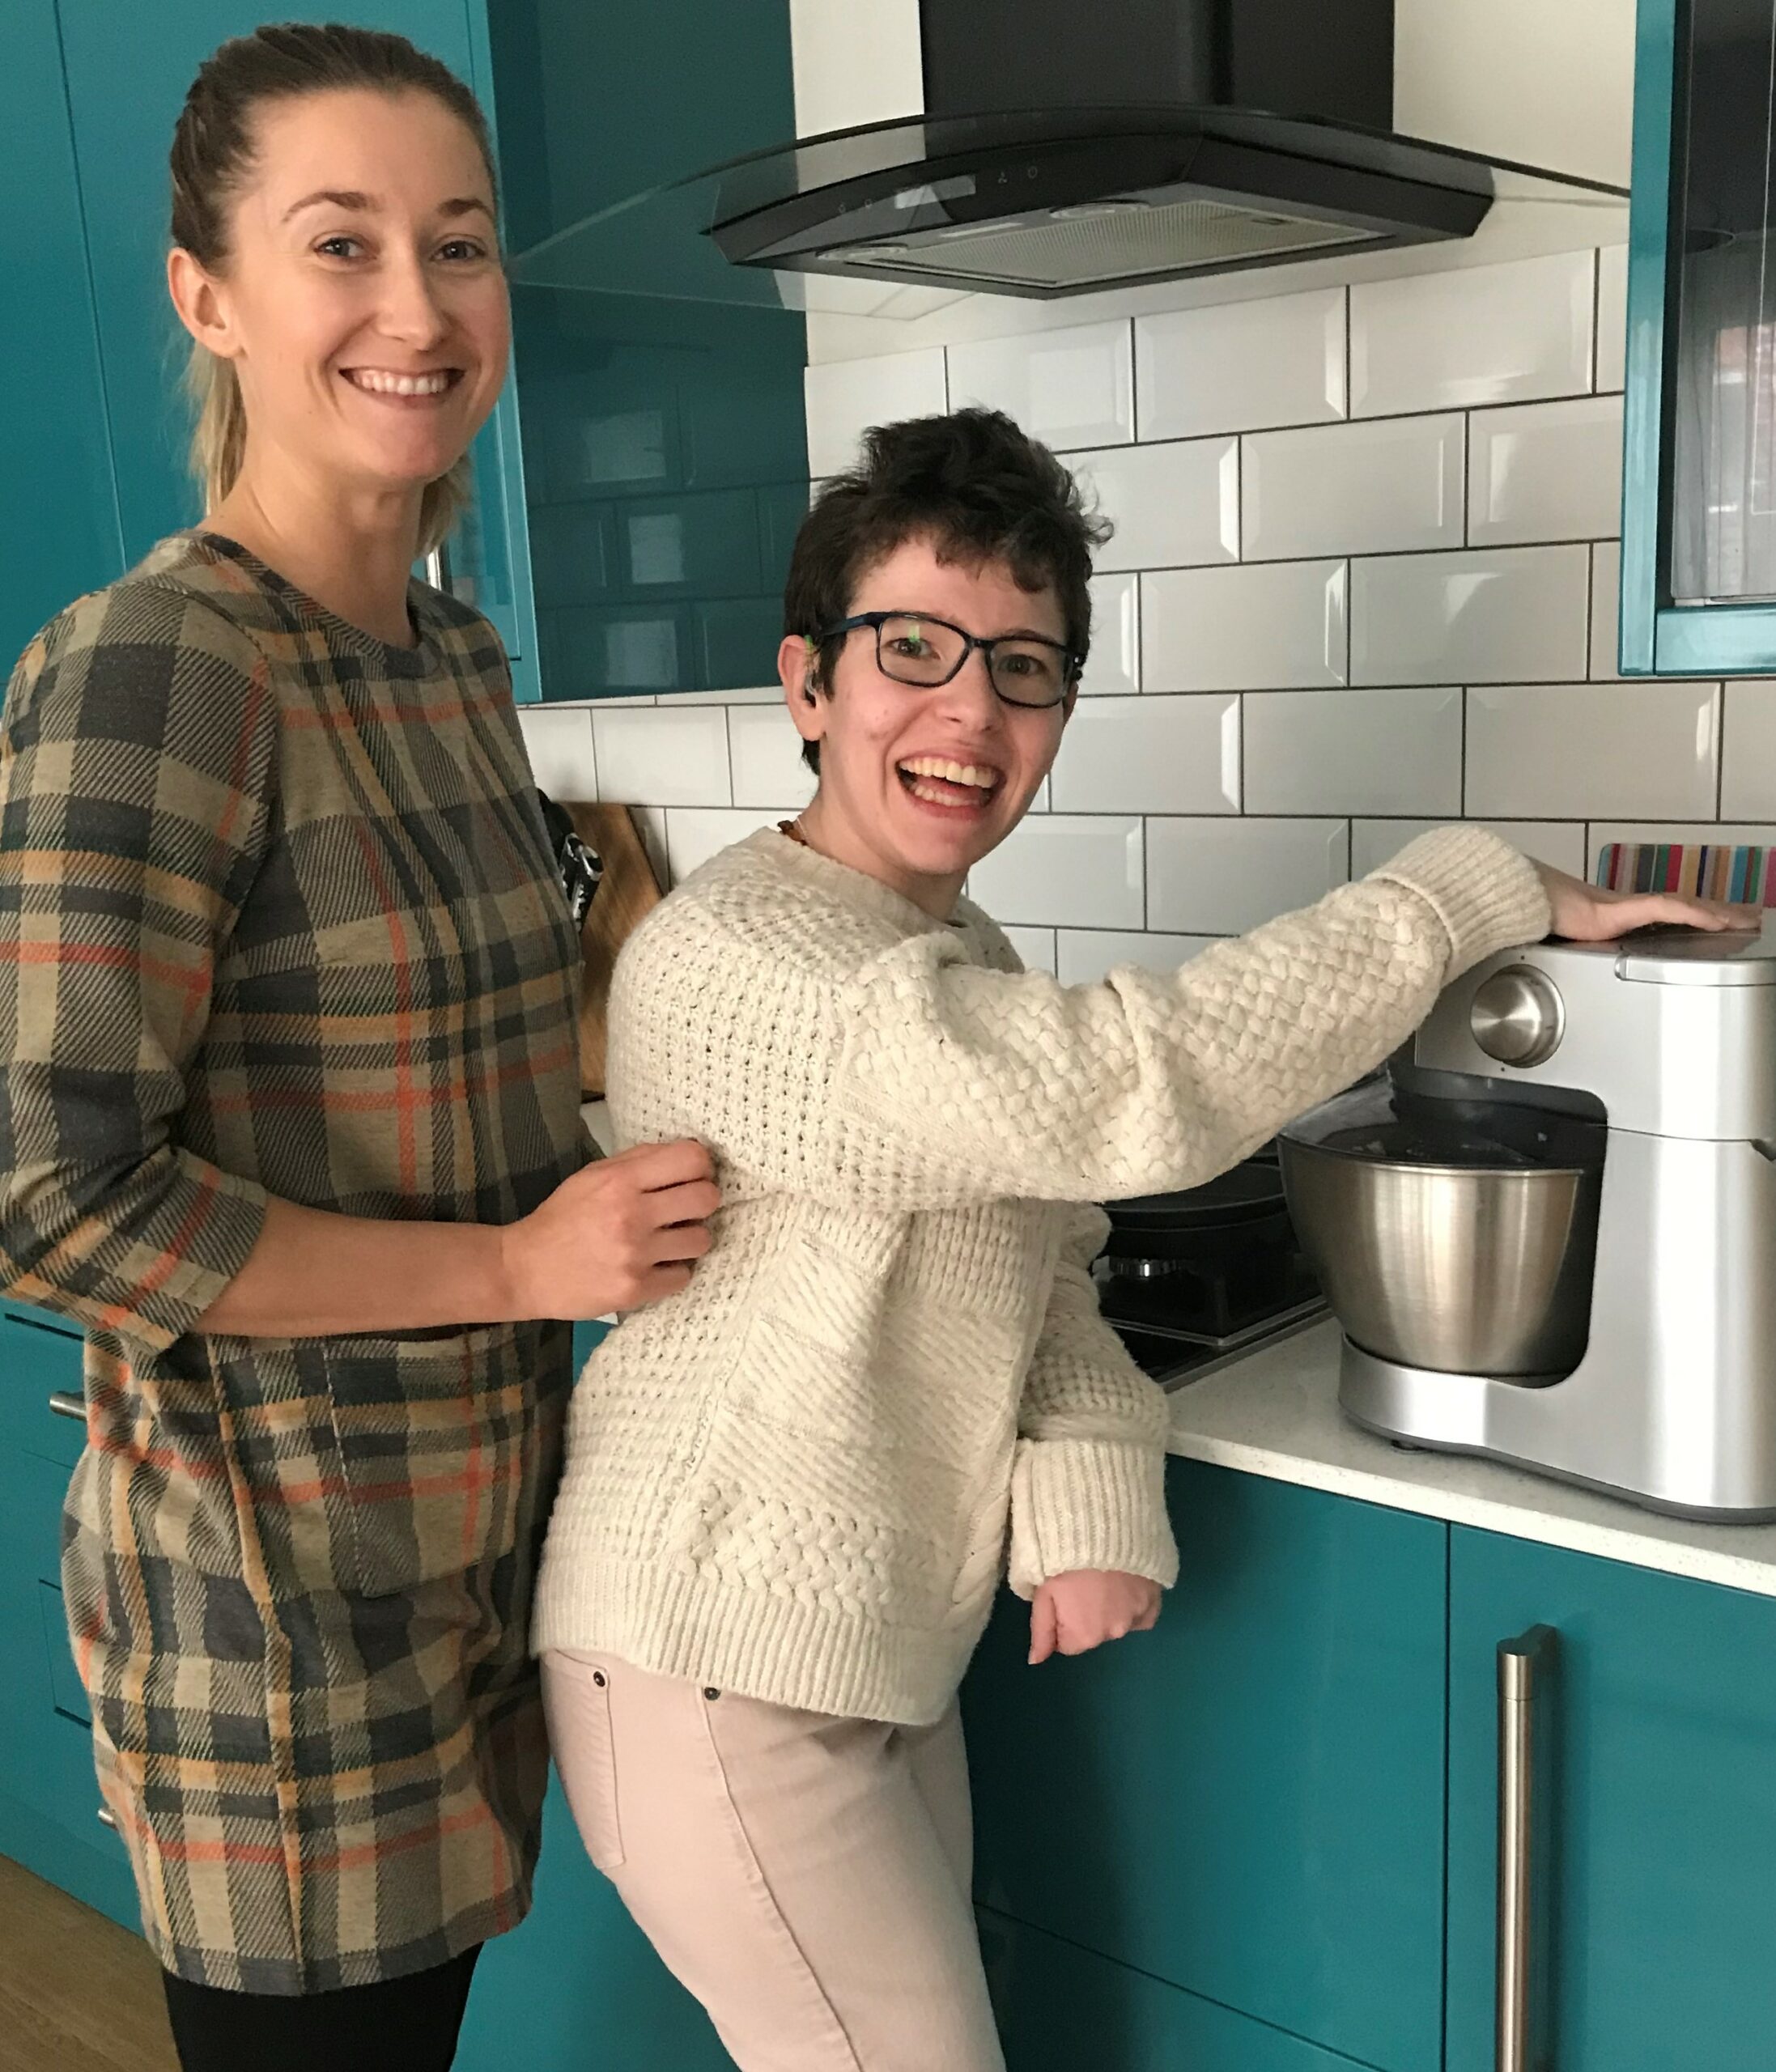 Cerebral palsy and independent living skills, using the mixer to bake a cake